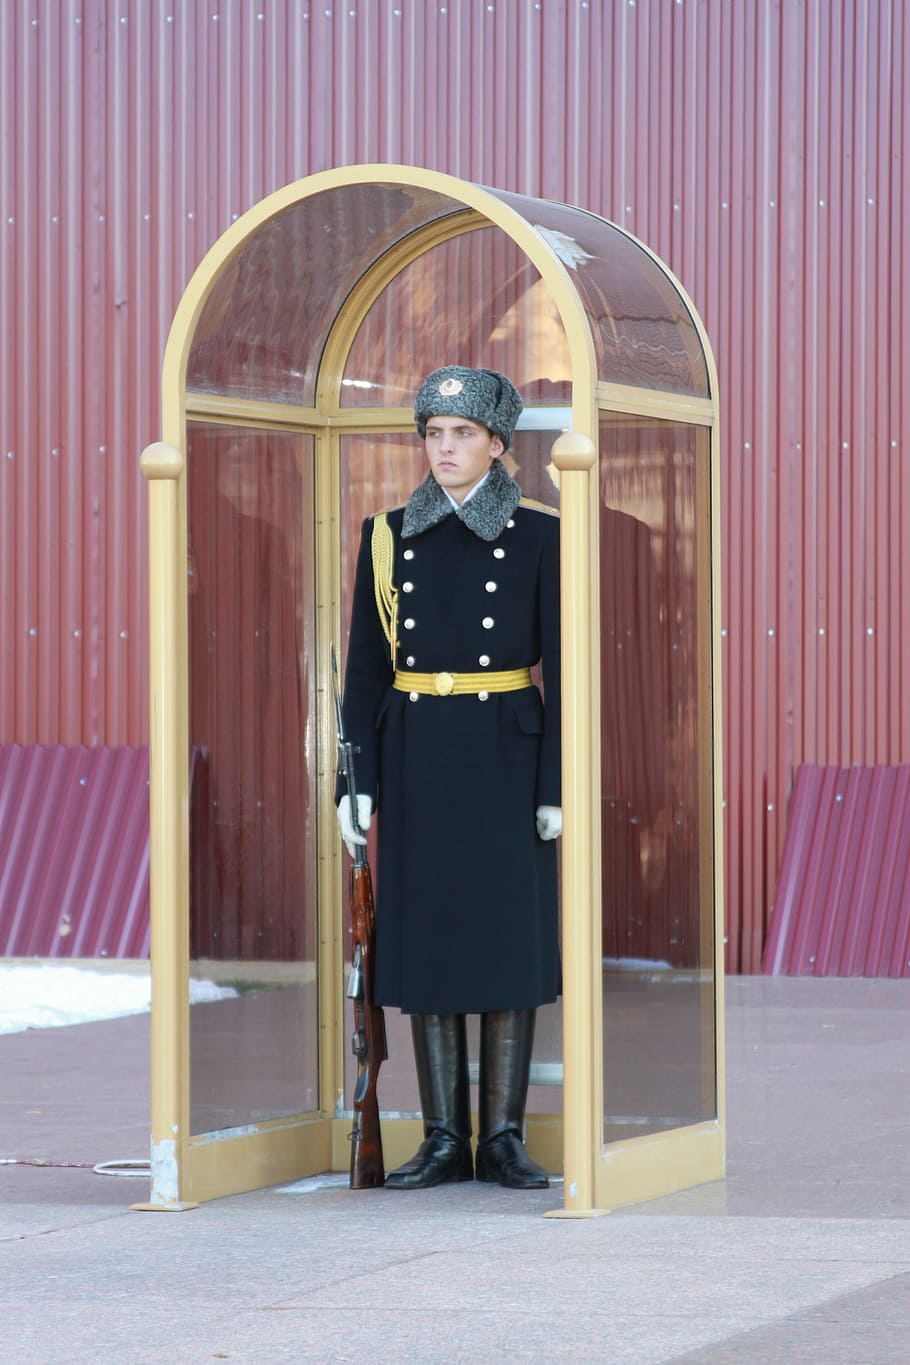 guard, honor, sentimental, russia, moscow, soldier, booth, sentry, protection, standing